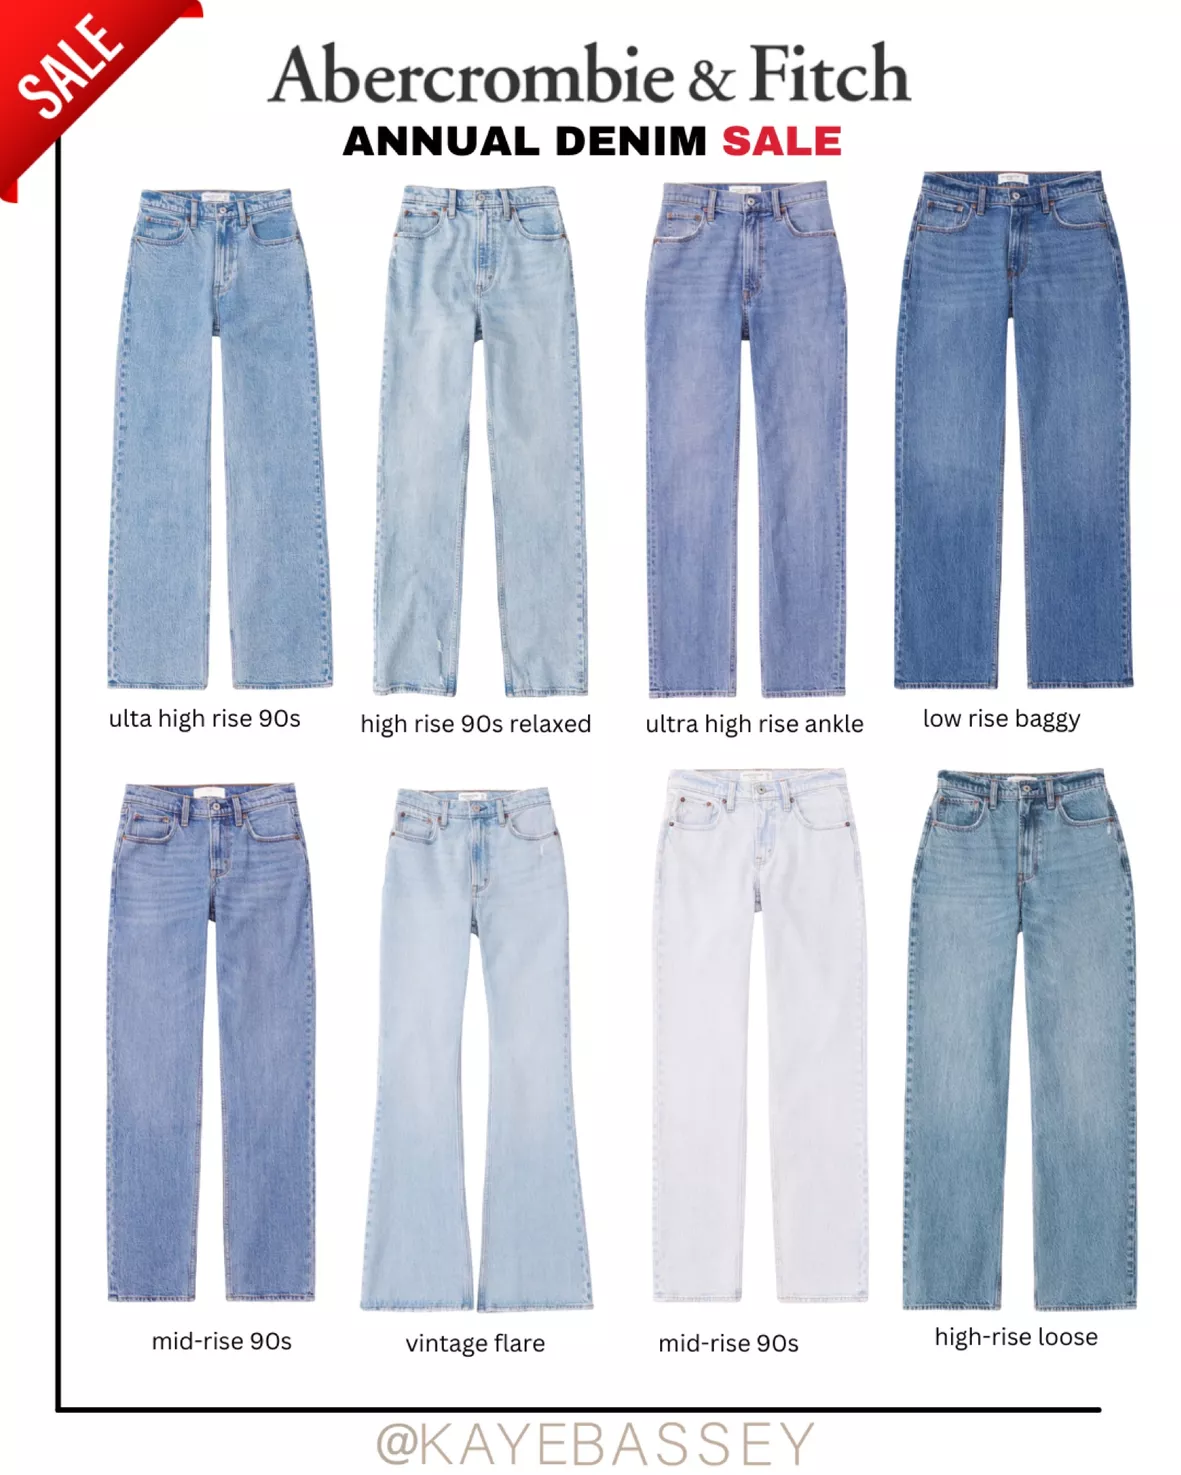 TikTok is obsessed with these Abercrombie jeans